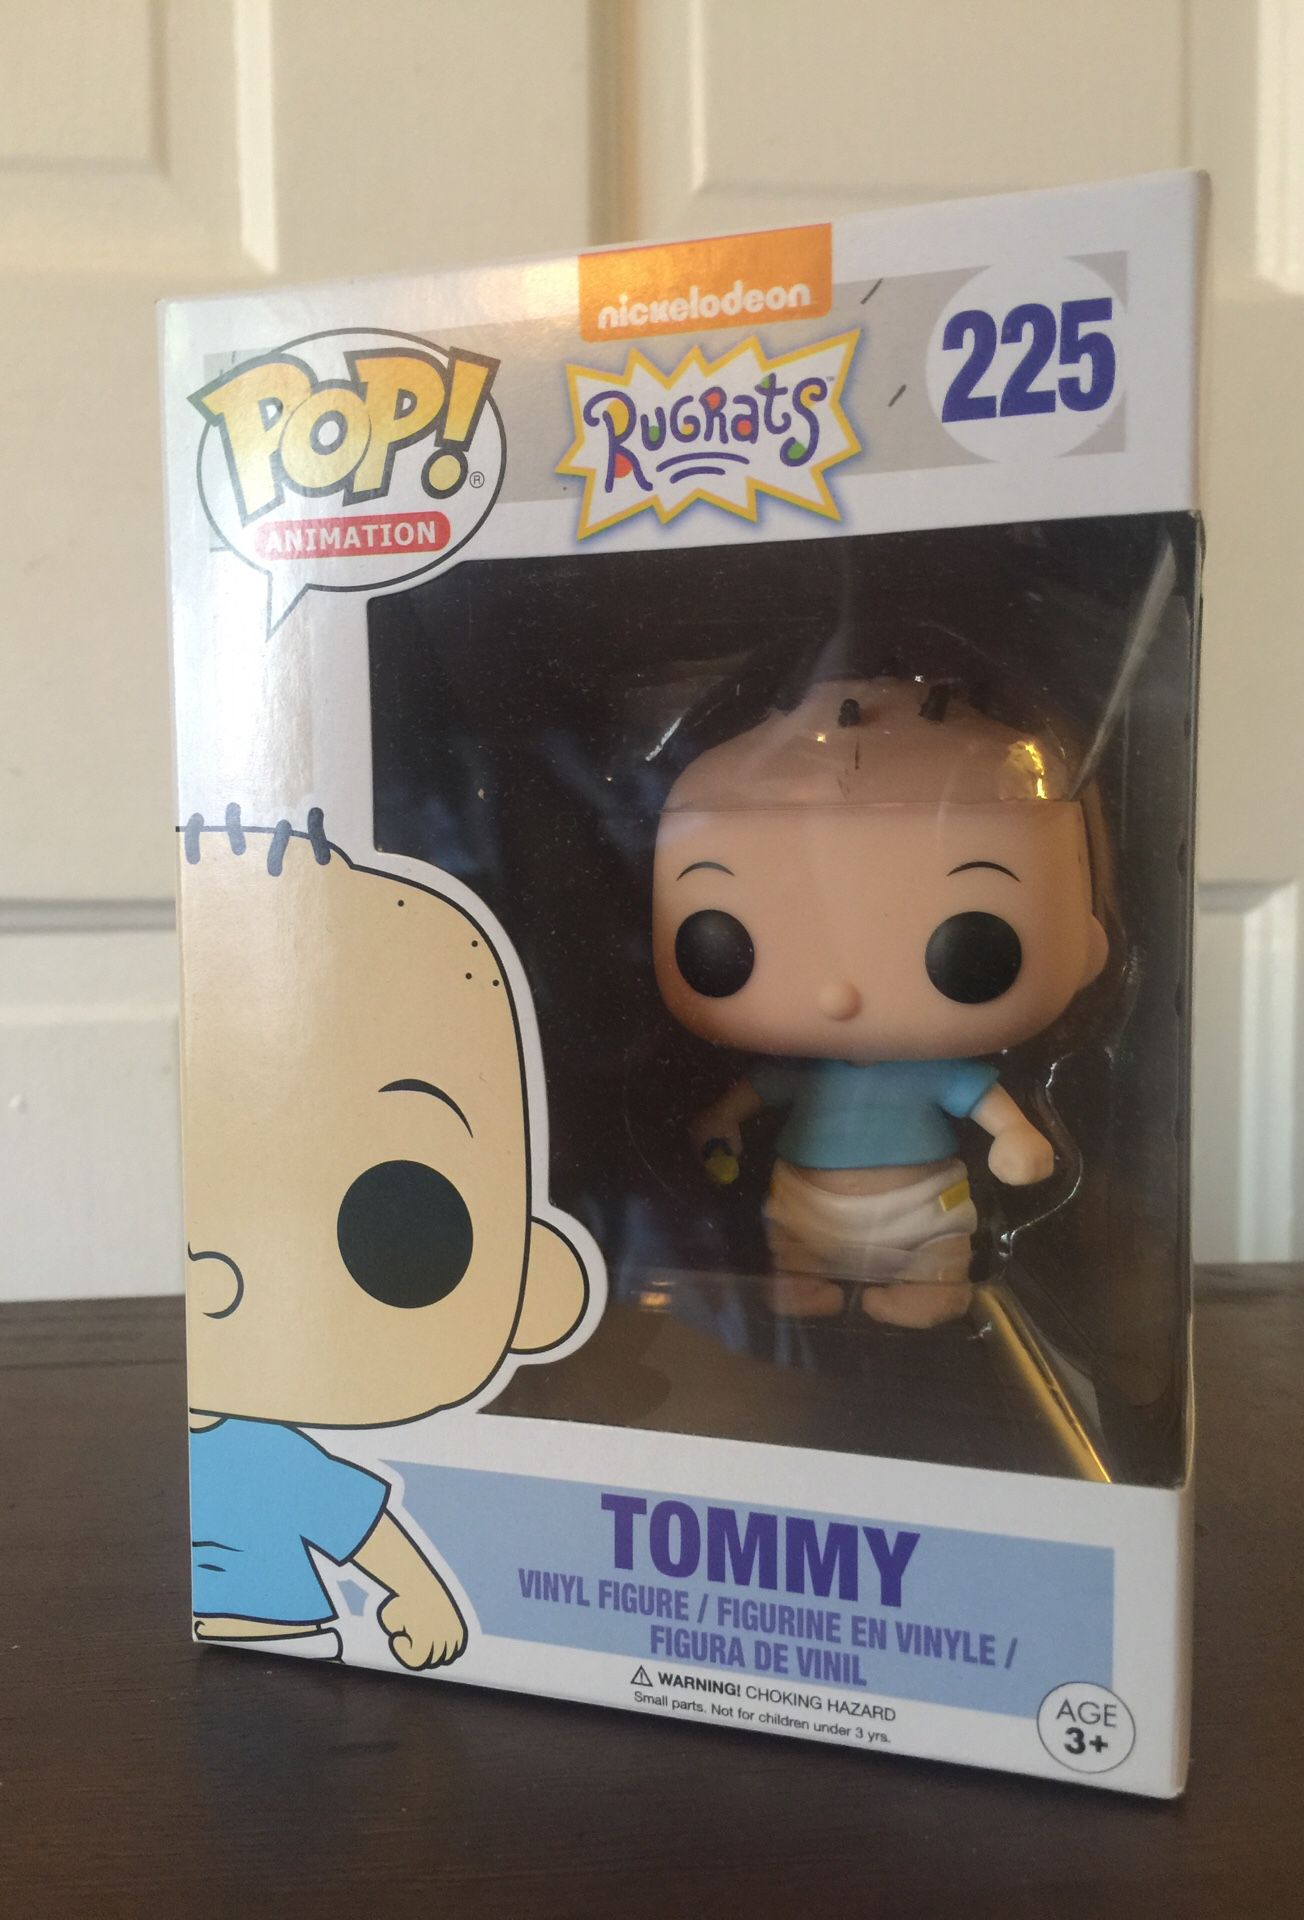 POP! Animation FUNKO POP! Nickelodeon Rugrats TOMMY